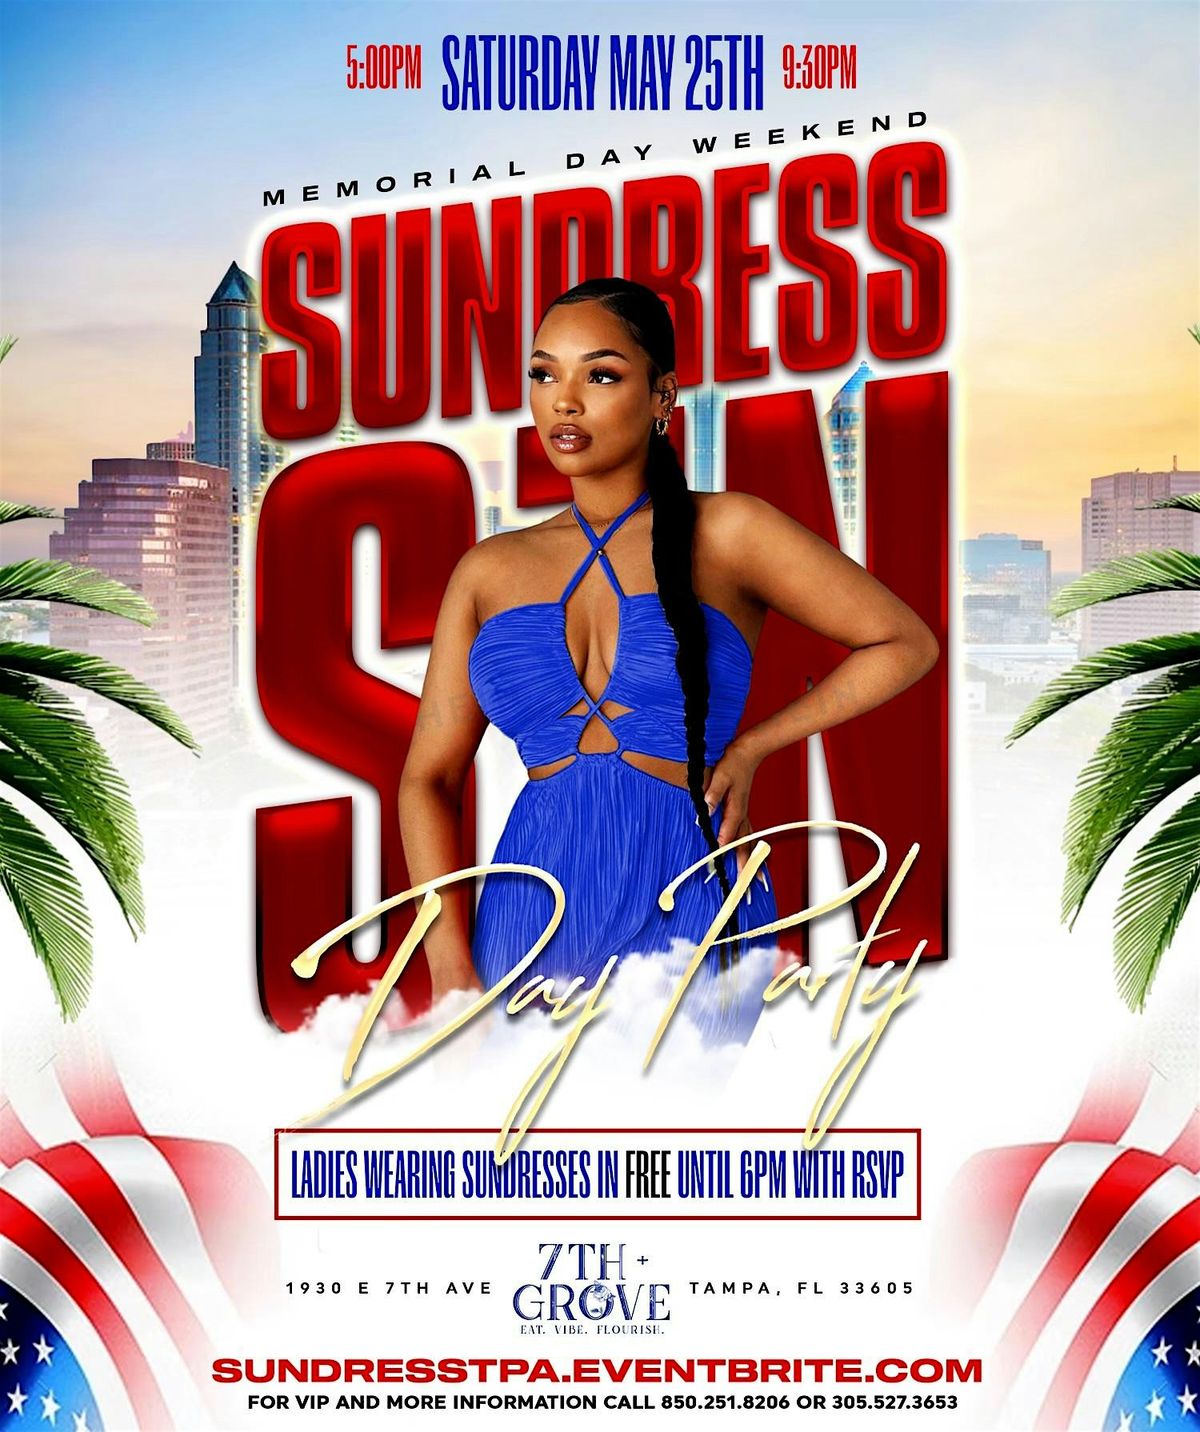 SUNDRESS SZN TAMPA - MEMORIAL DAY WEEKEND DAY PARTY!